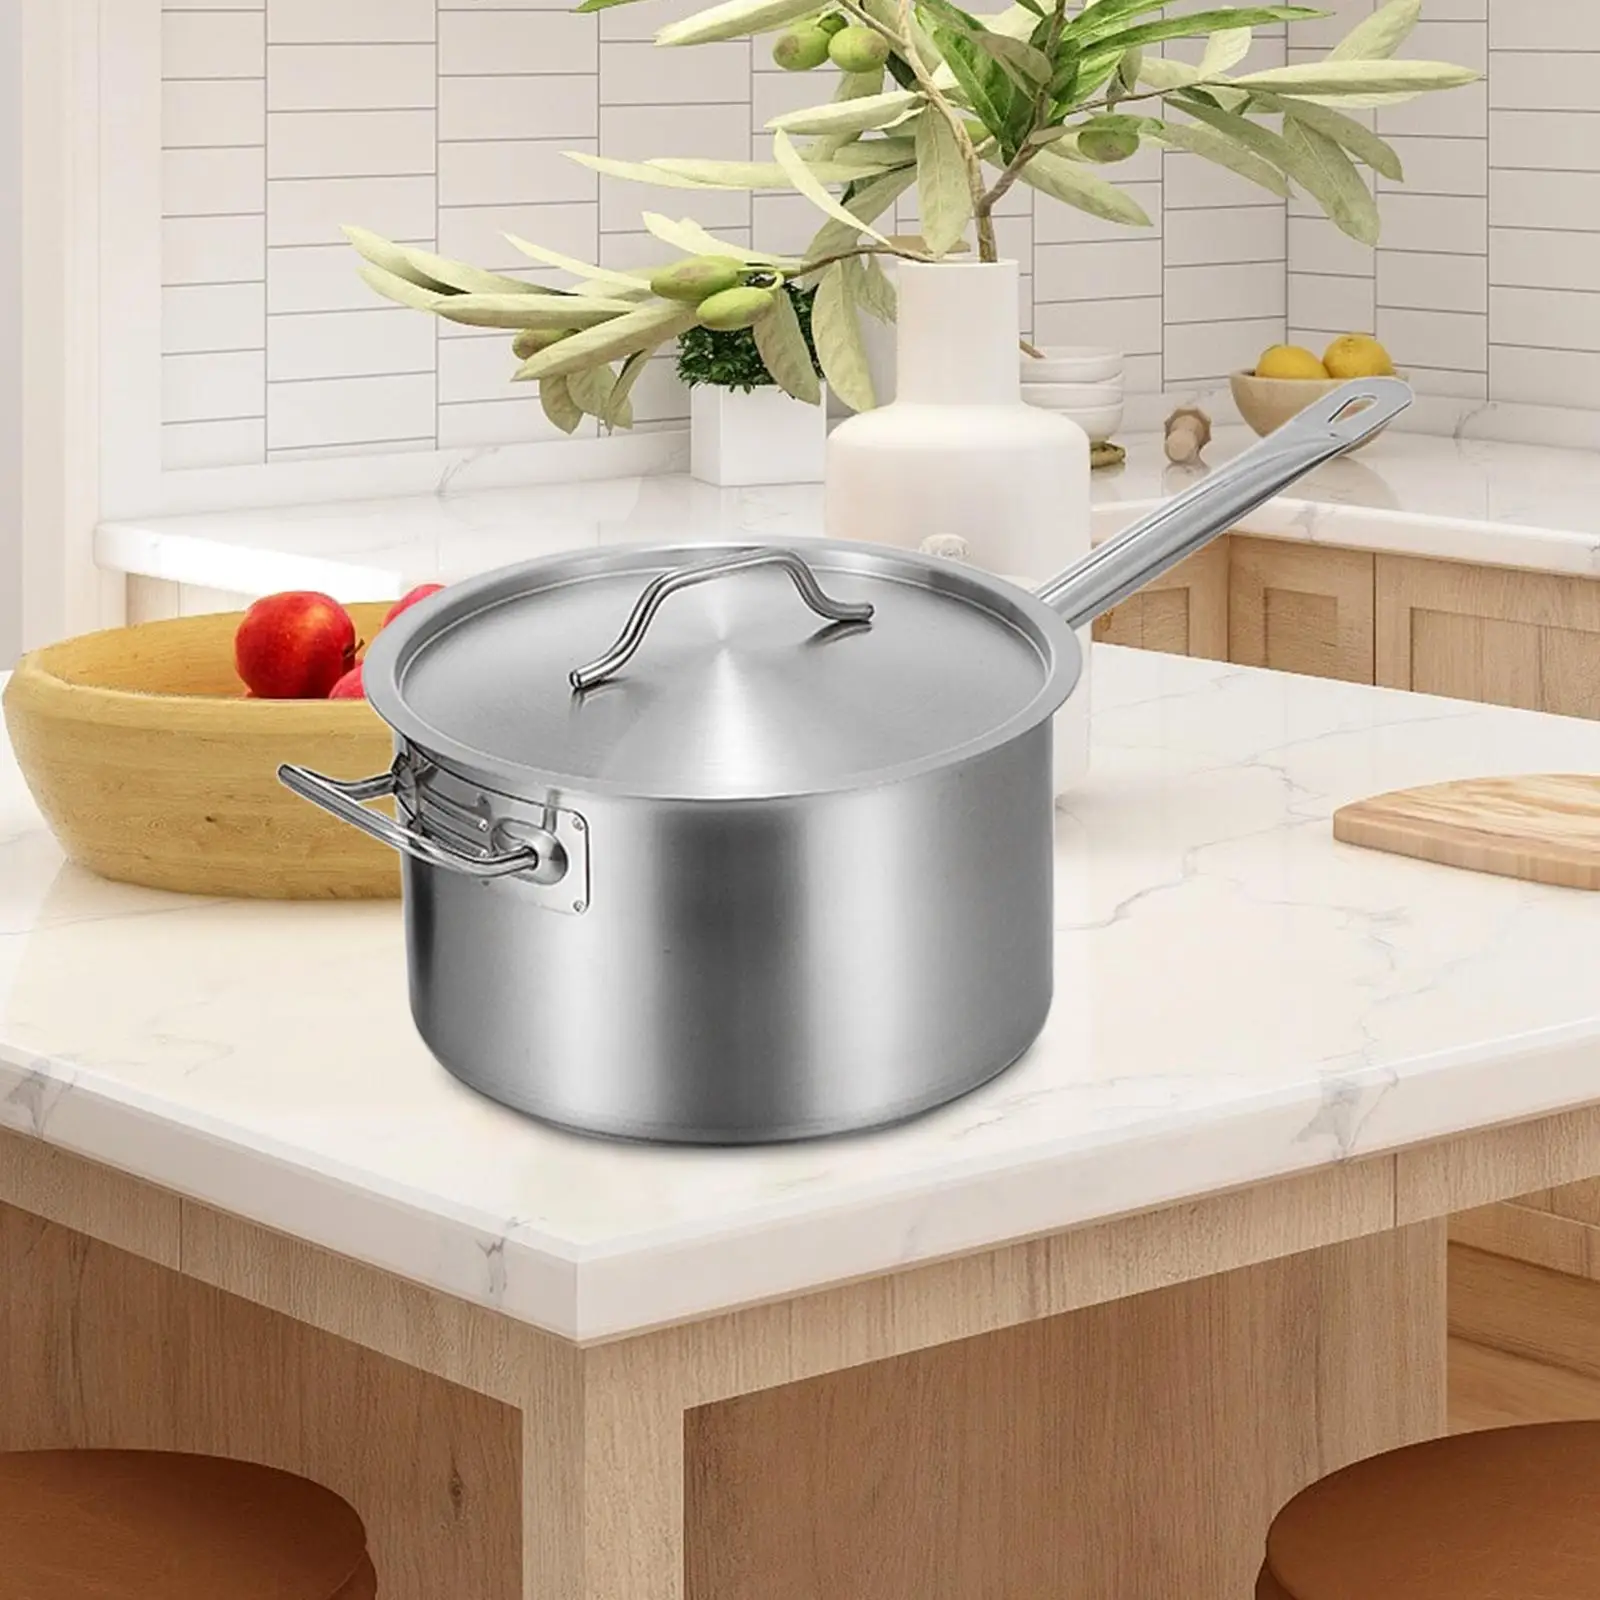 Stainless Steel Cooking Pot Portable Cheese Soup Multipurpose Saucepan with Lid for Teahouse Restaurants Hotel